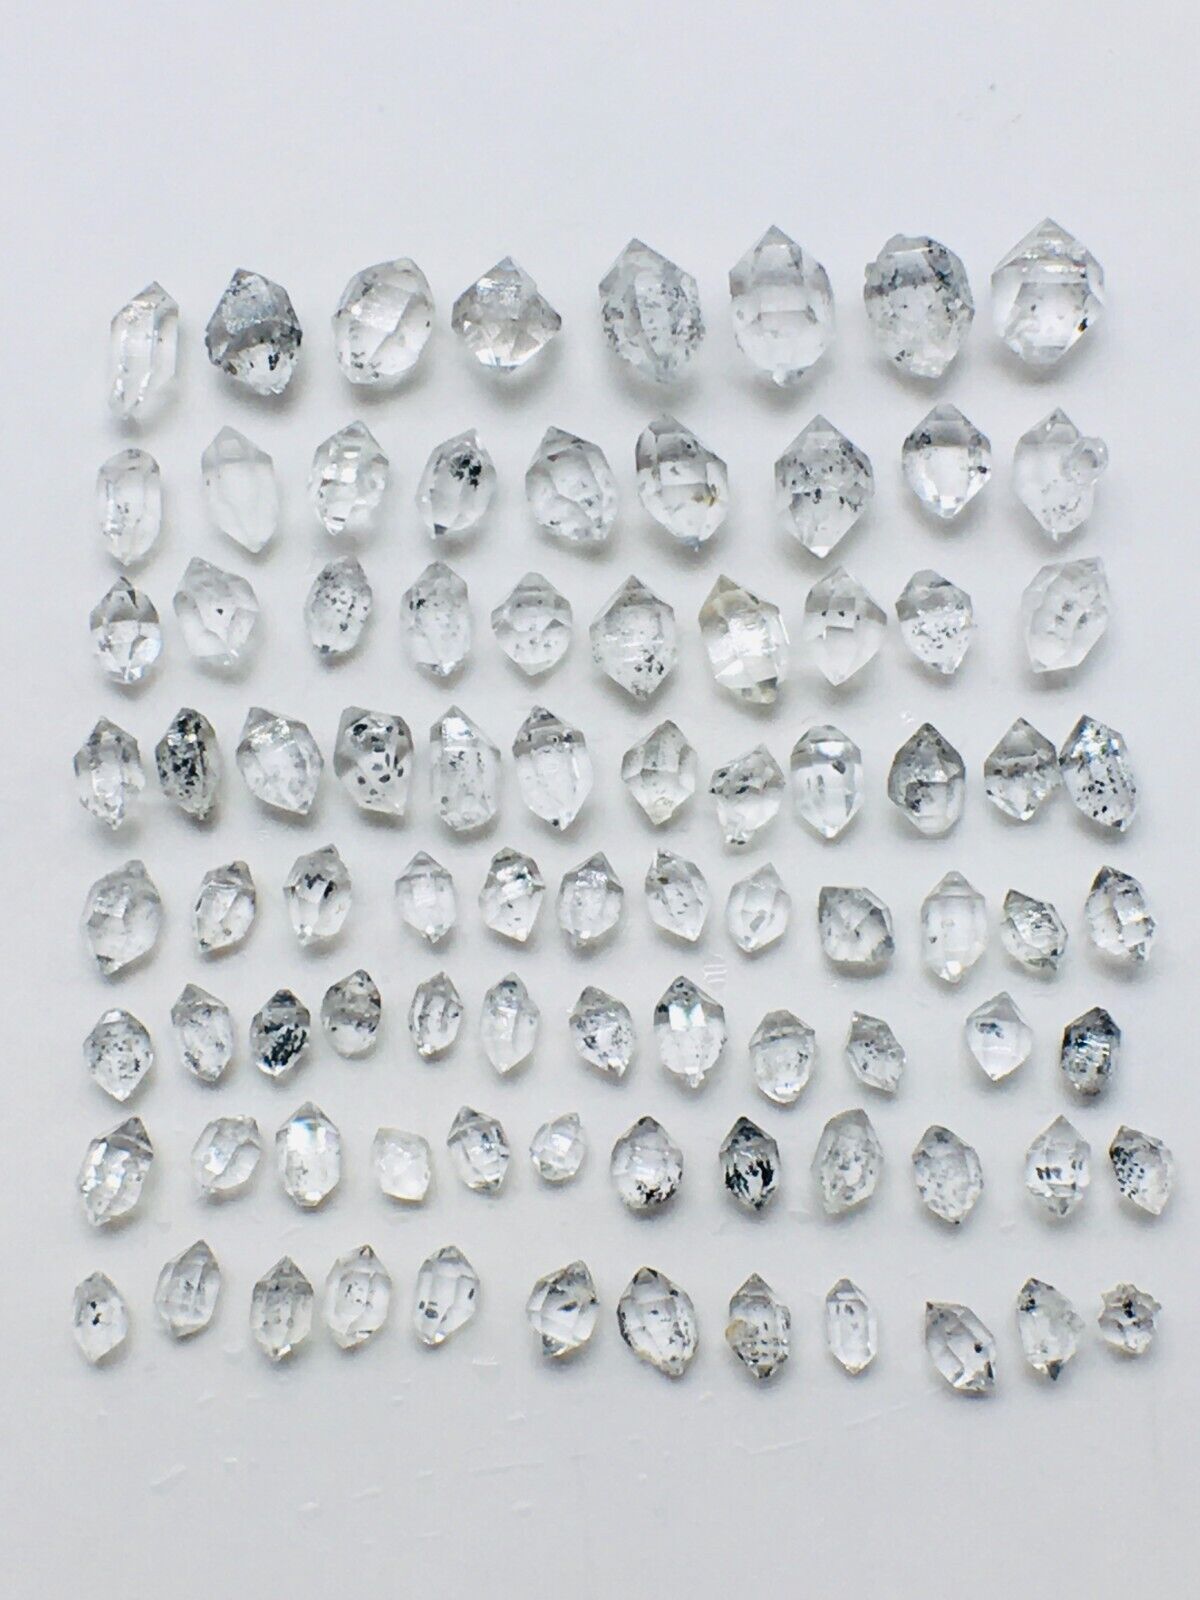 87pc Herkimer Diamond AAA small 4mm to 10mm Top gem crystal From-NY 40ct